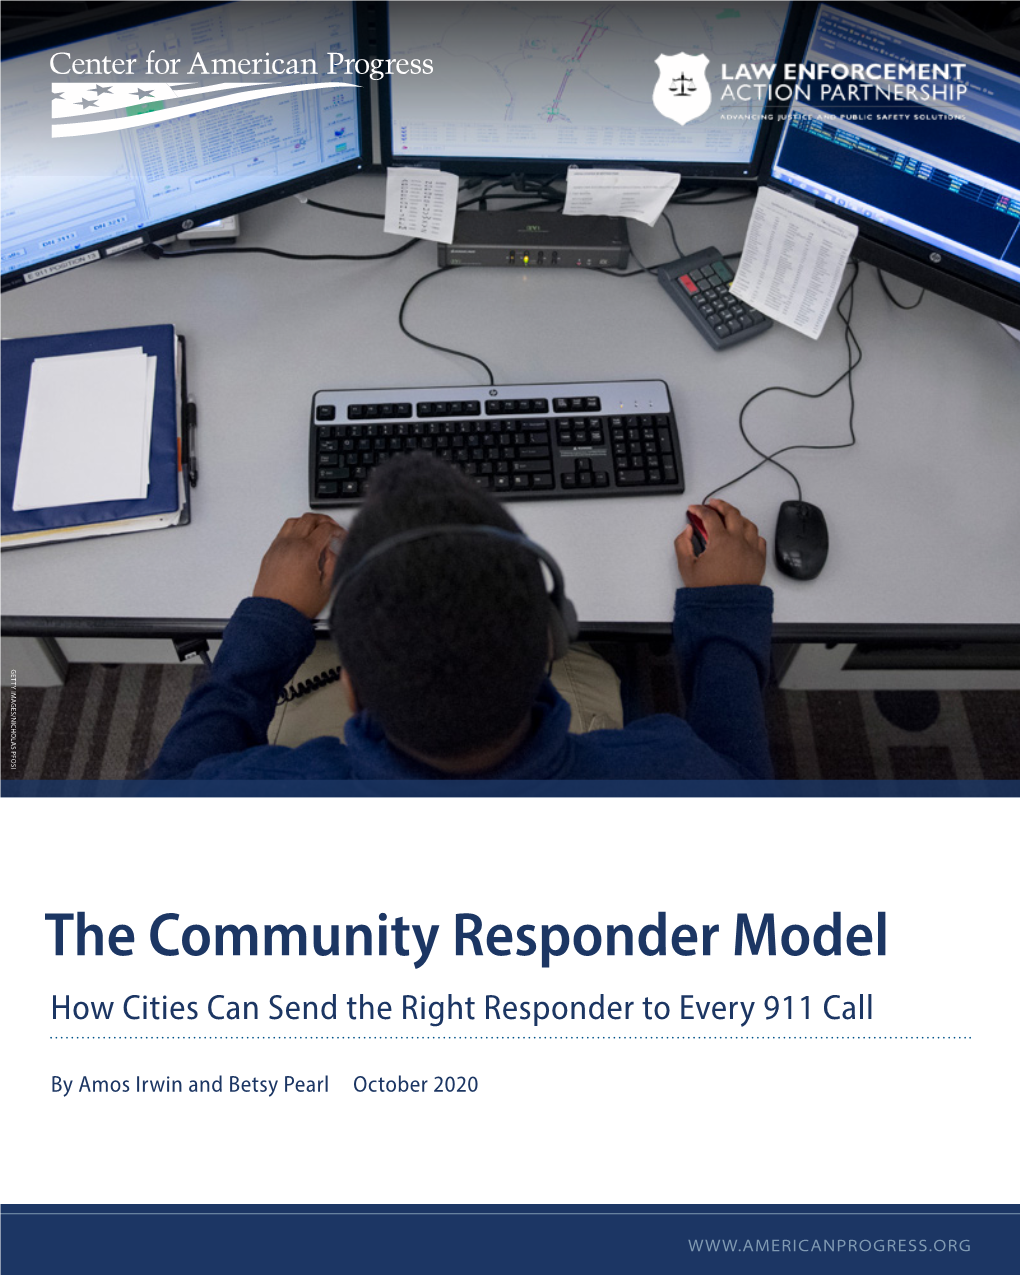 The Community Responder Model How Cities Can Send the Right Responder to Every 911 Call